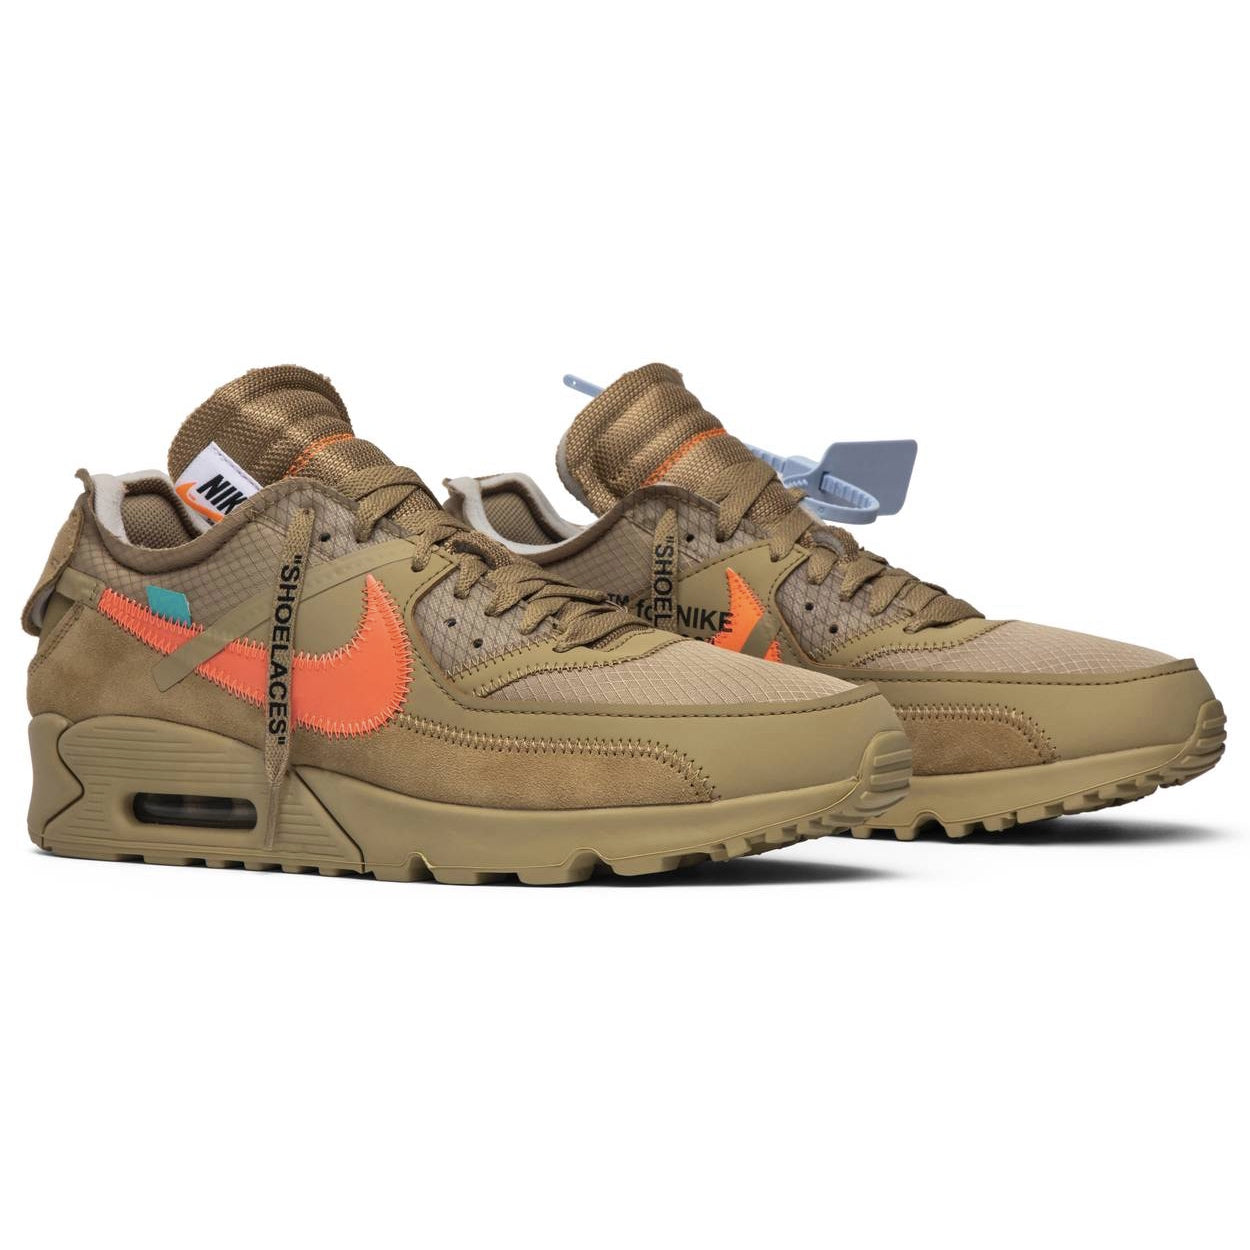 Nike Air Max 90 OFF-WHITE Desert Ore - After Burn